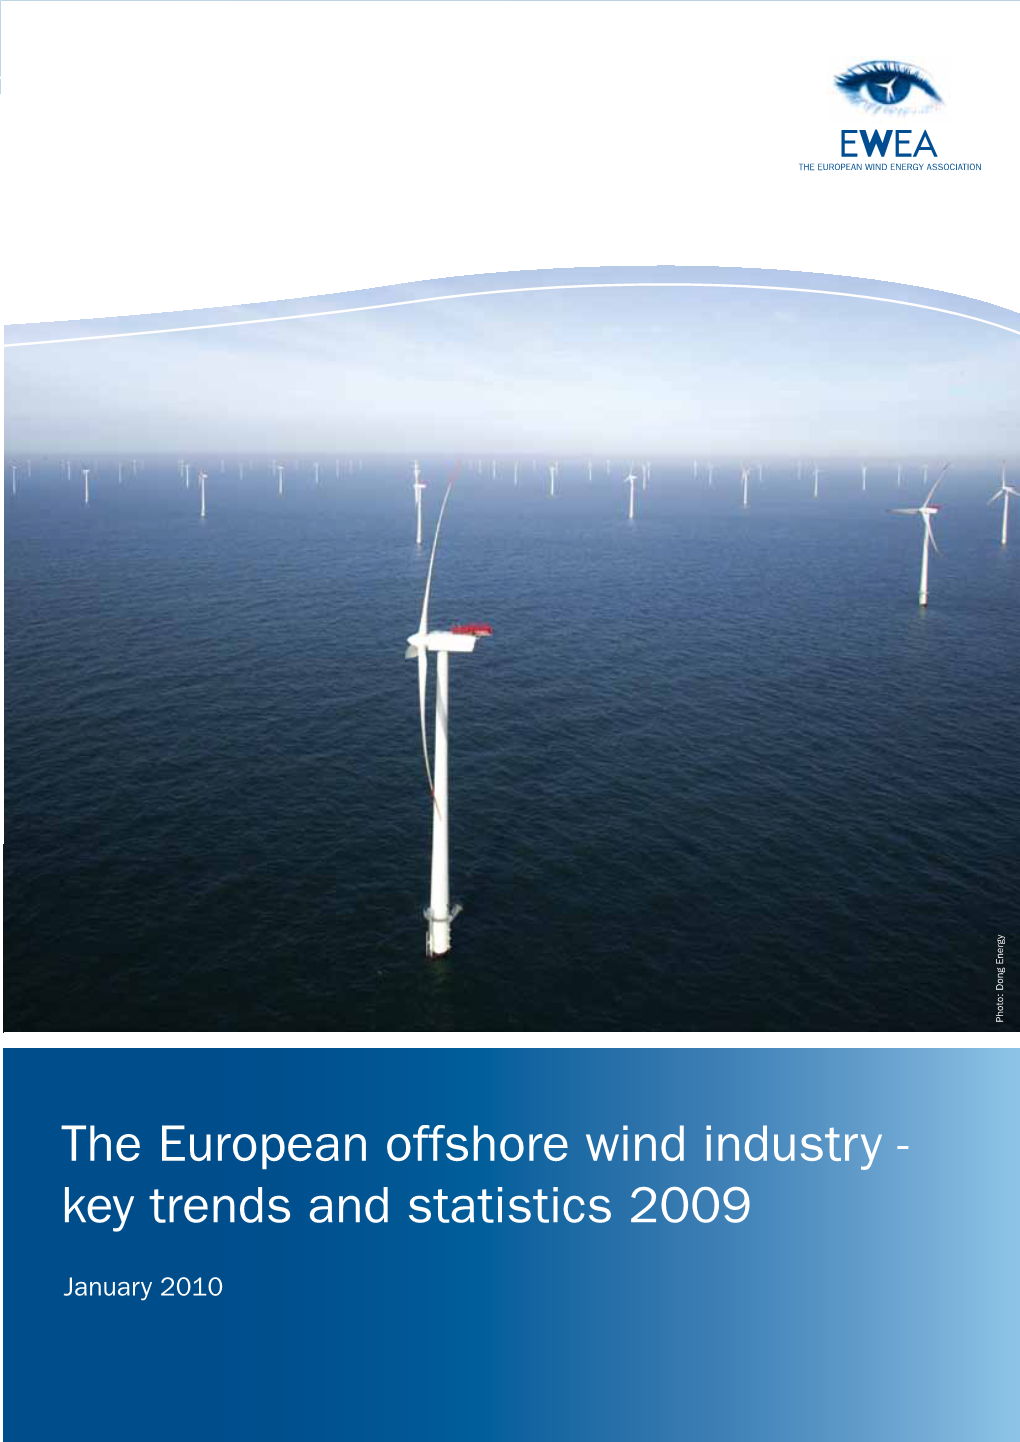 The European Offshore Wind Industry - Key Trends and Statistics 2009